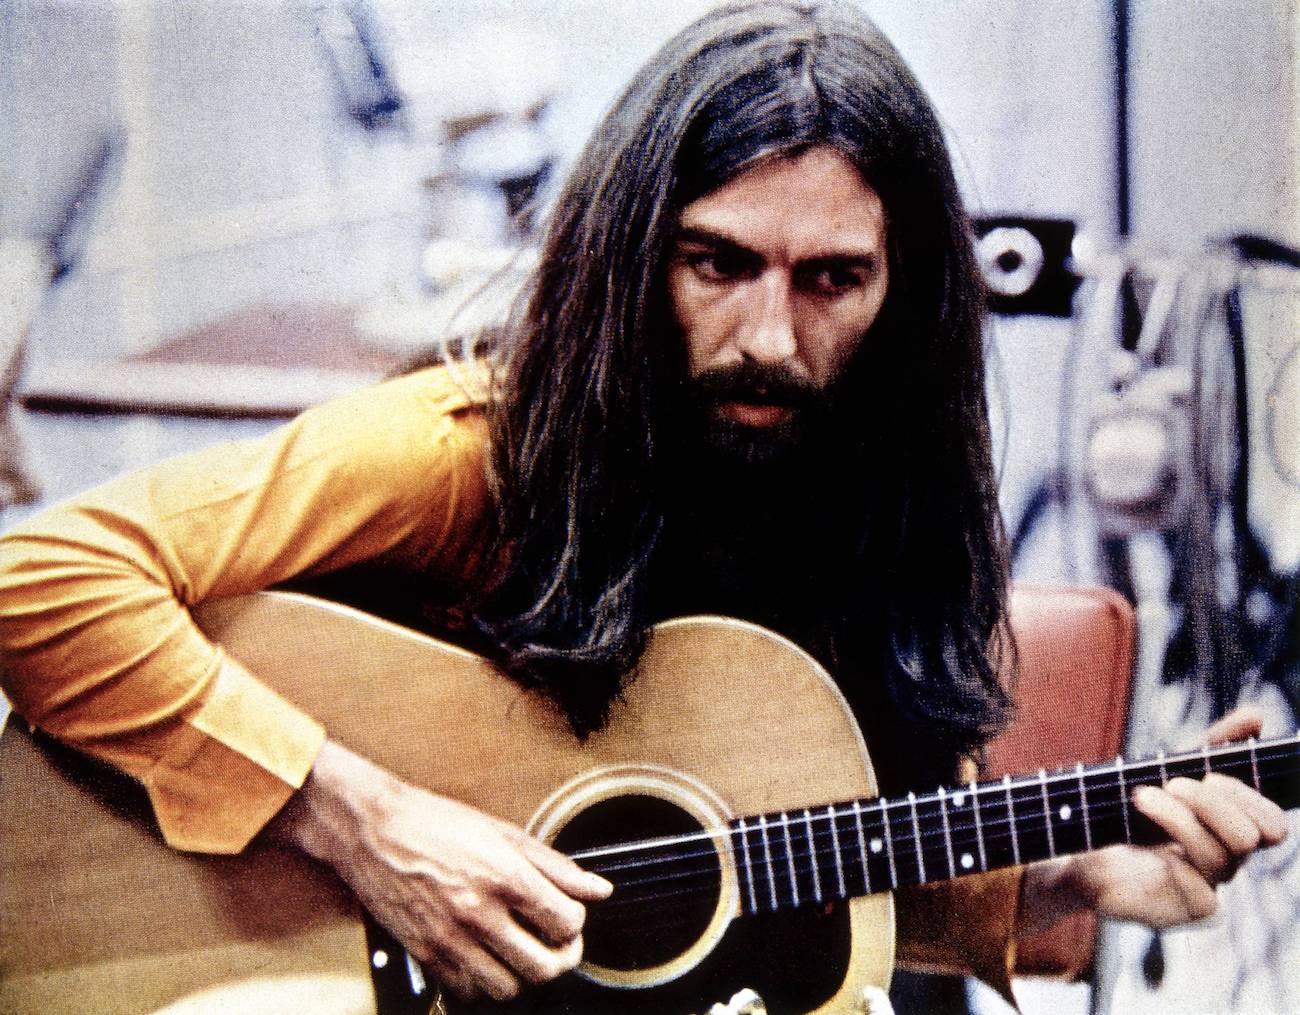 George Harrison in the recording studio working on songs like 'My Sweet Lord' on his debut album, 'All Things Must Pass' in 1970.